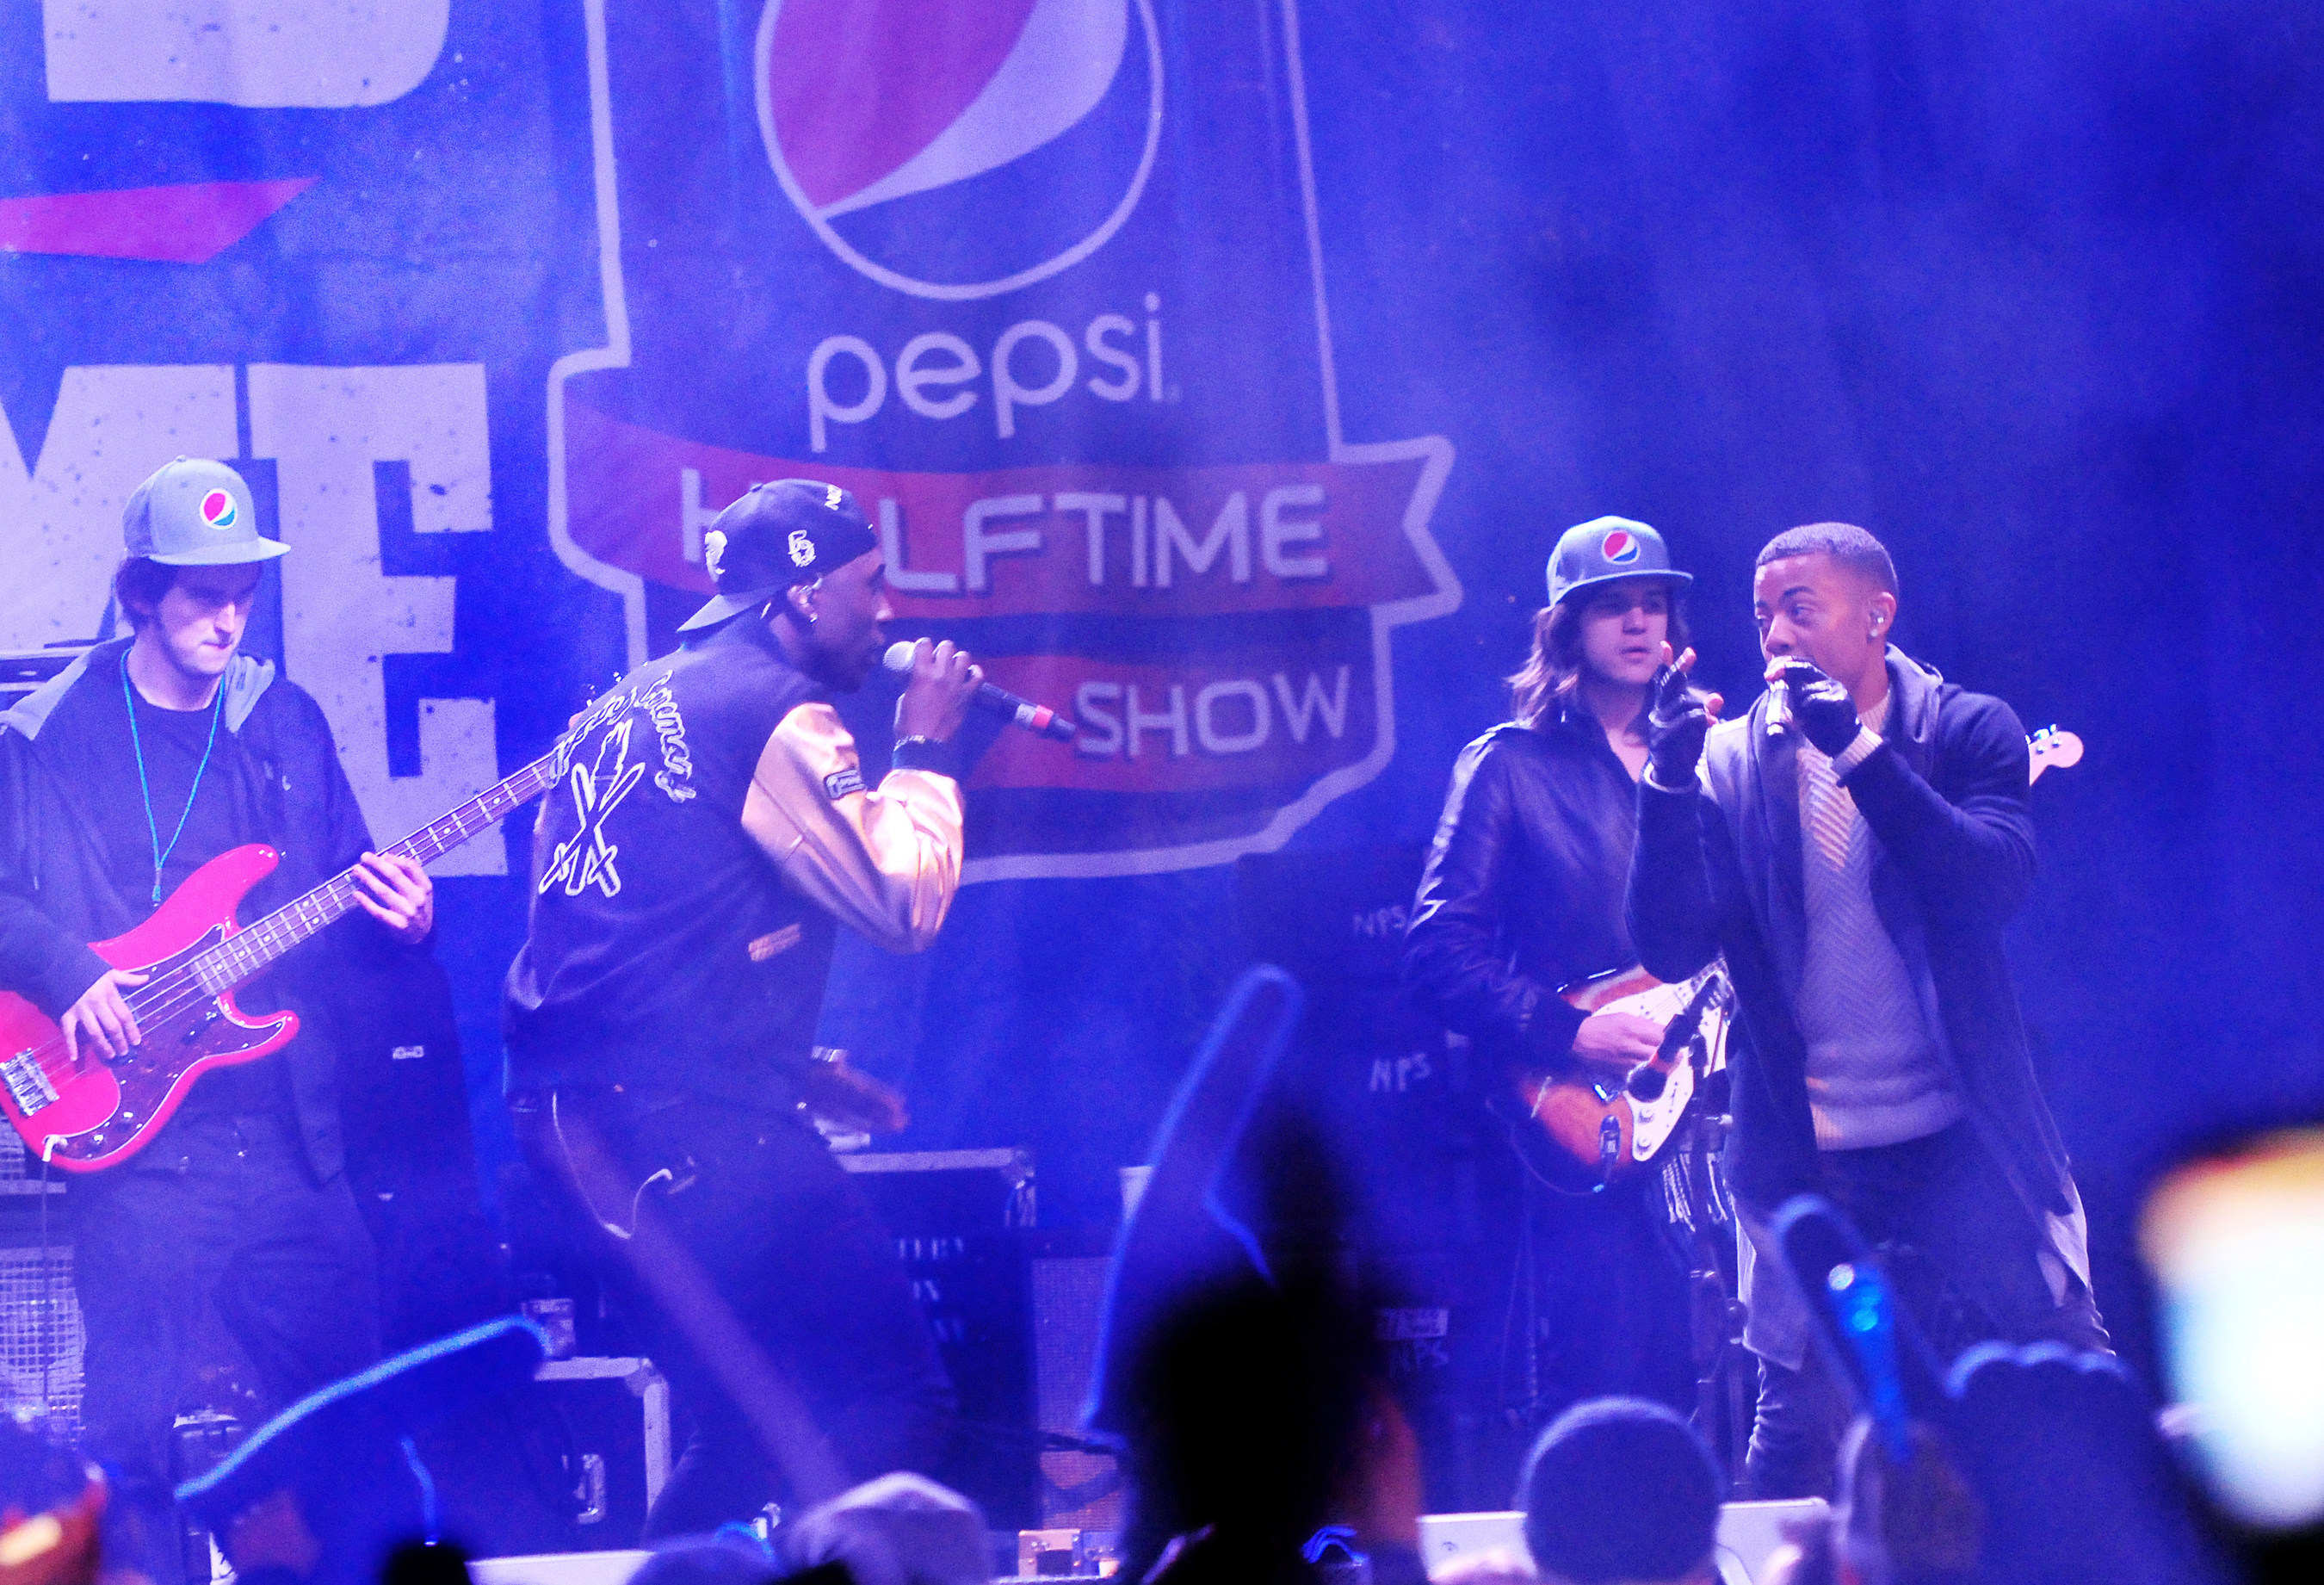 Nico & Vinz brought the magic of a Pepsi Super Bowl Halftime Show to Rochester, New York, the most hyped hometown in America, as part of Pepsi's "Hyped for Halftime" campaign.